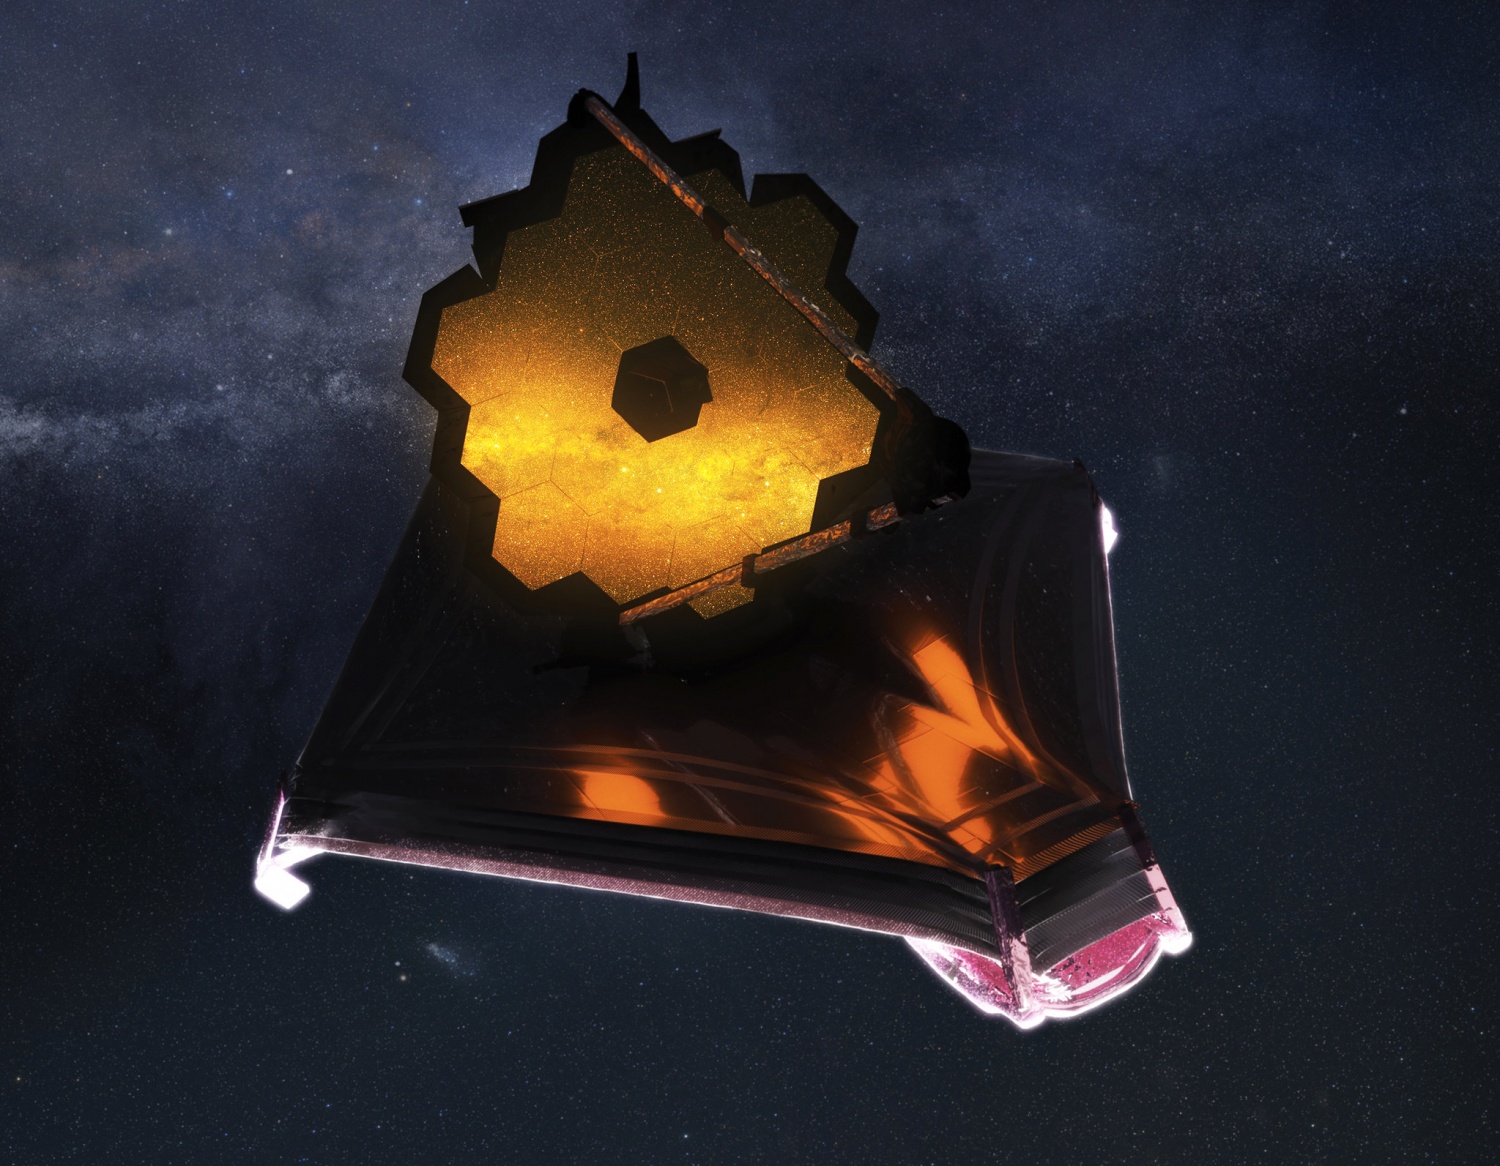 The James Webb Space Telescope Photo Shows Damage Done by a